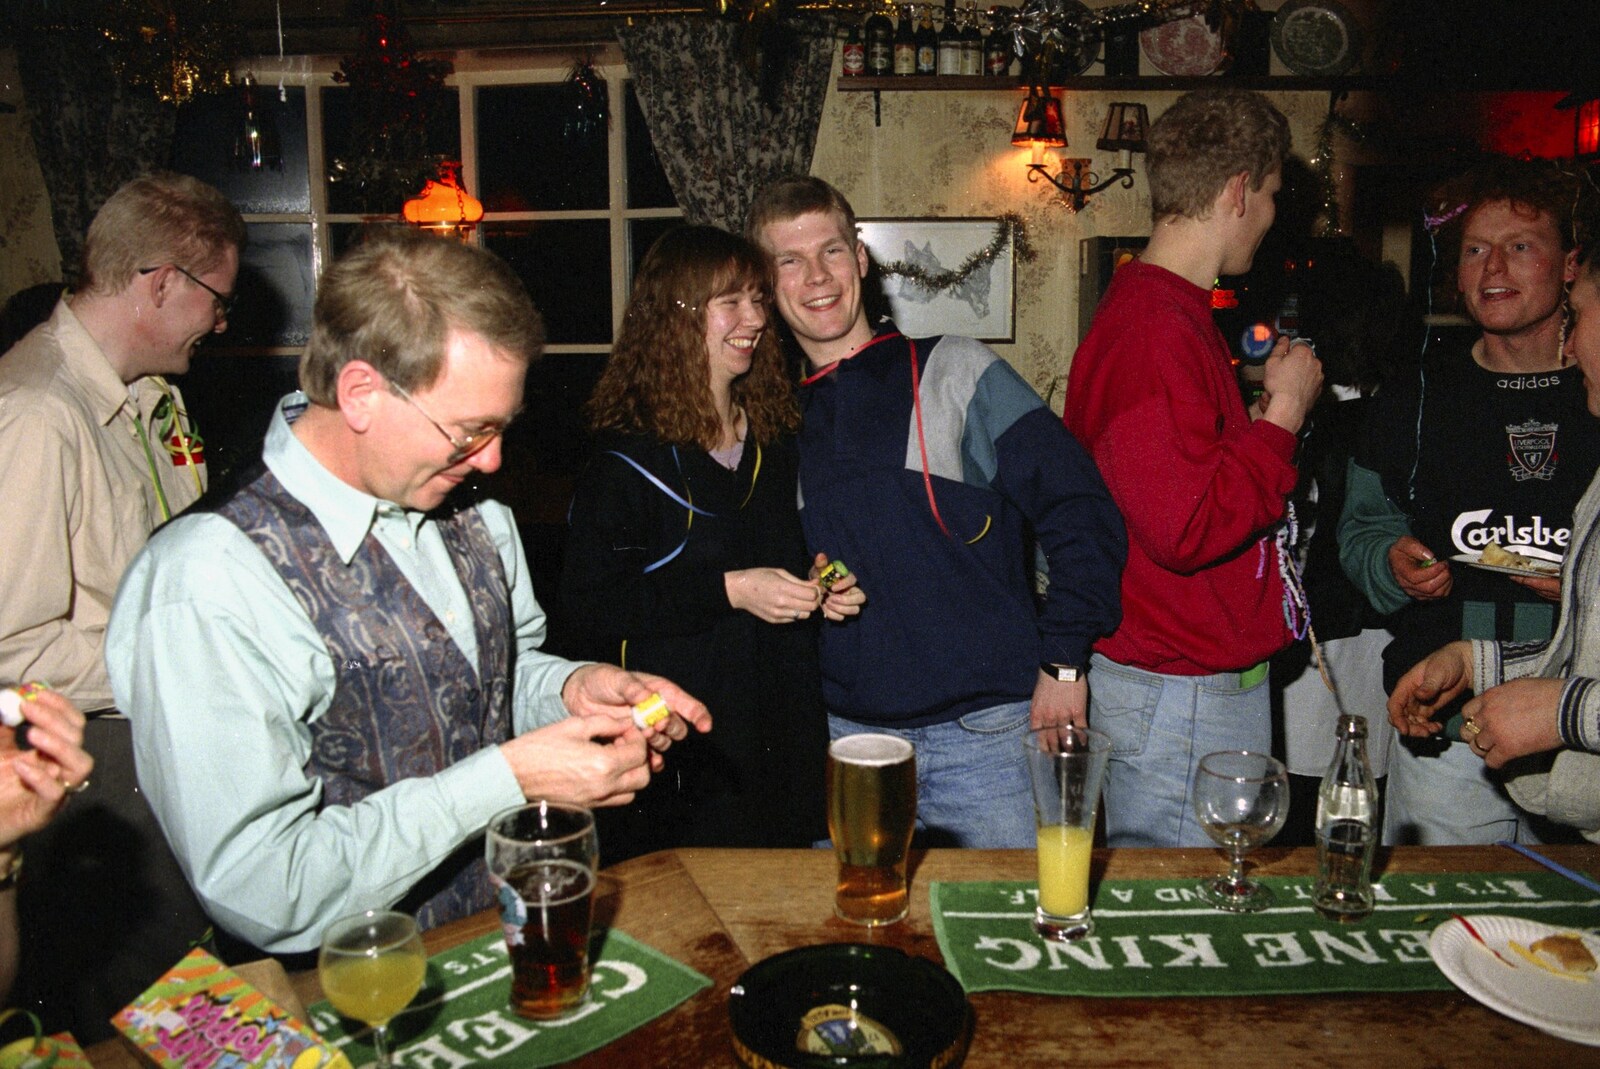 John Willy inspects his party popper from New Year's Eve at the Swan Inn, Brome, Suffolk - 31st December 1994